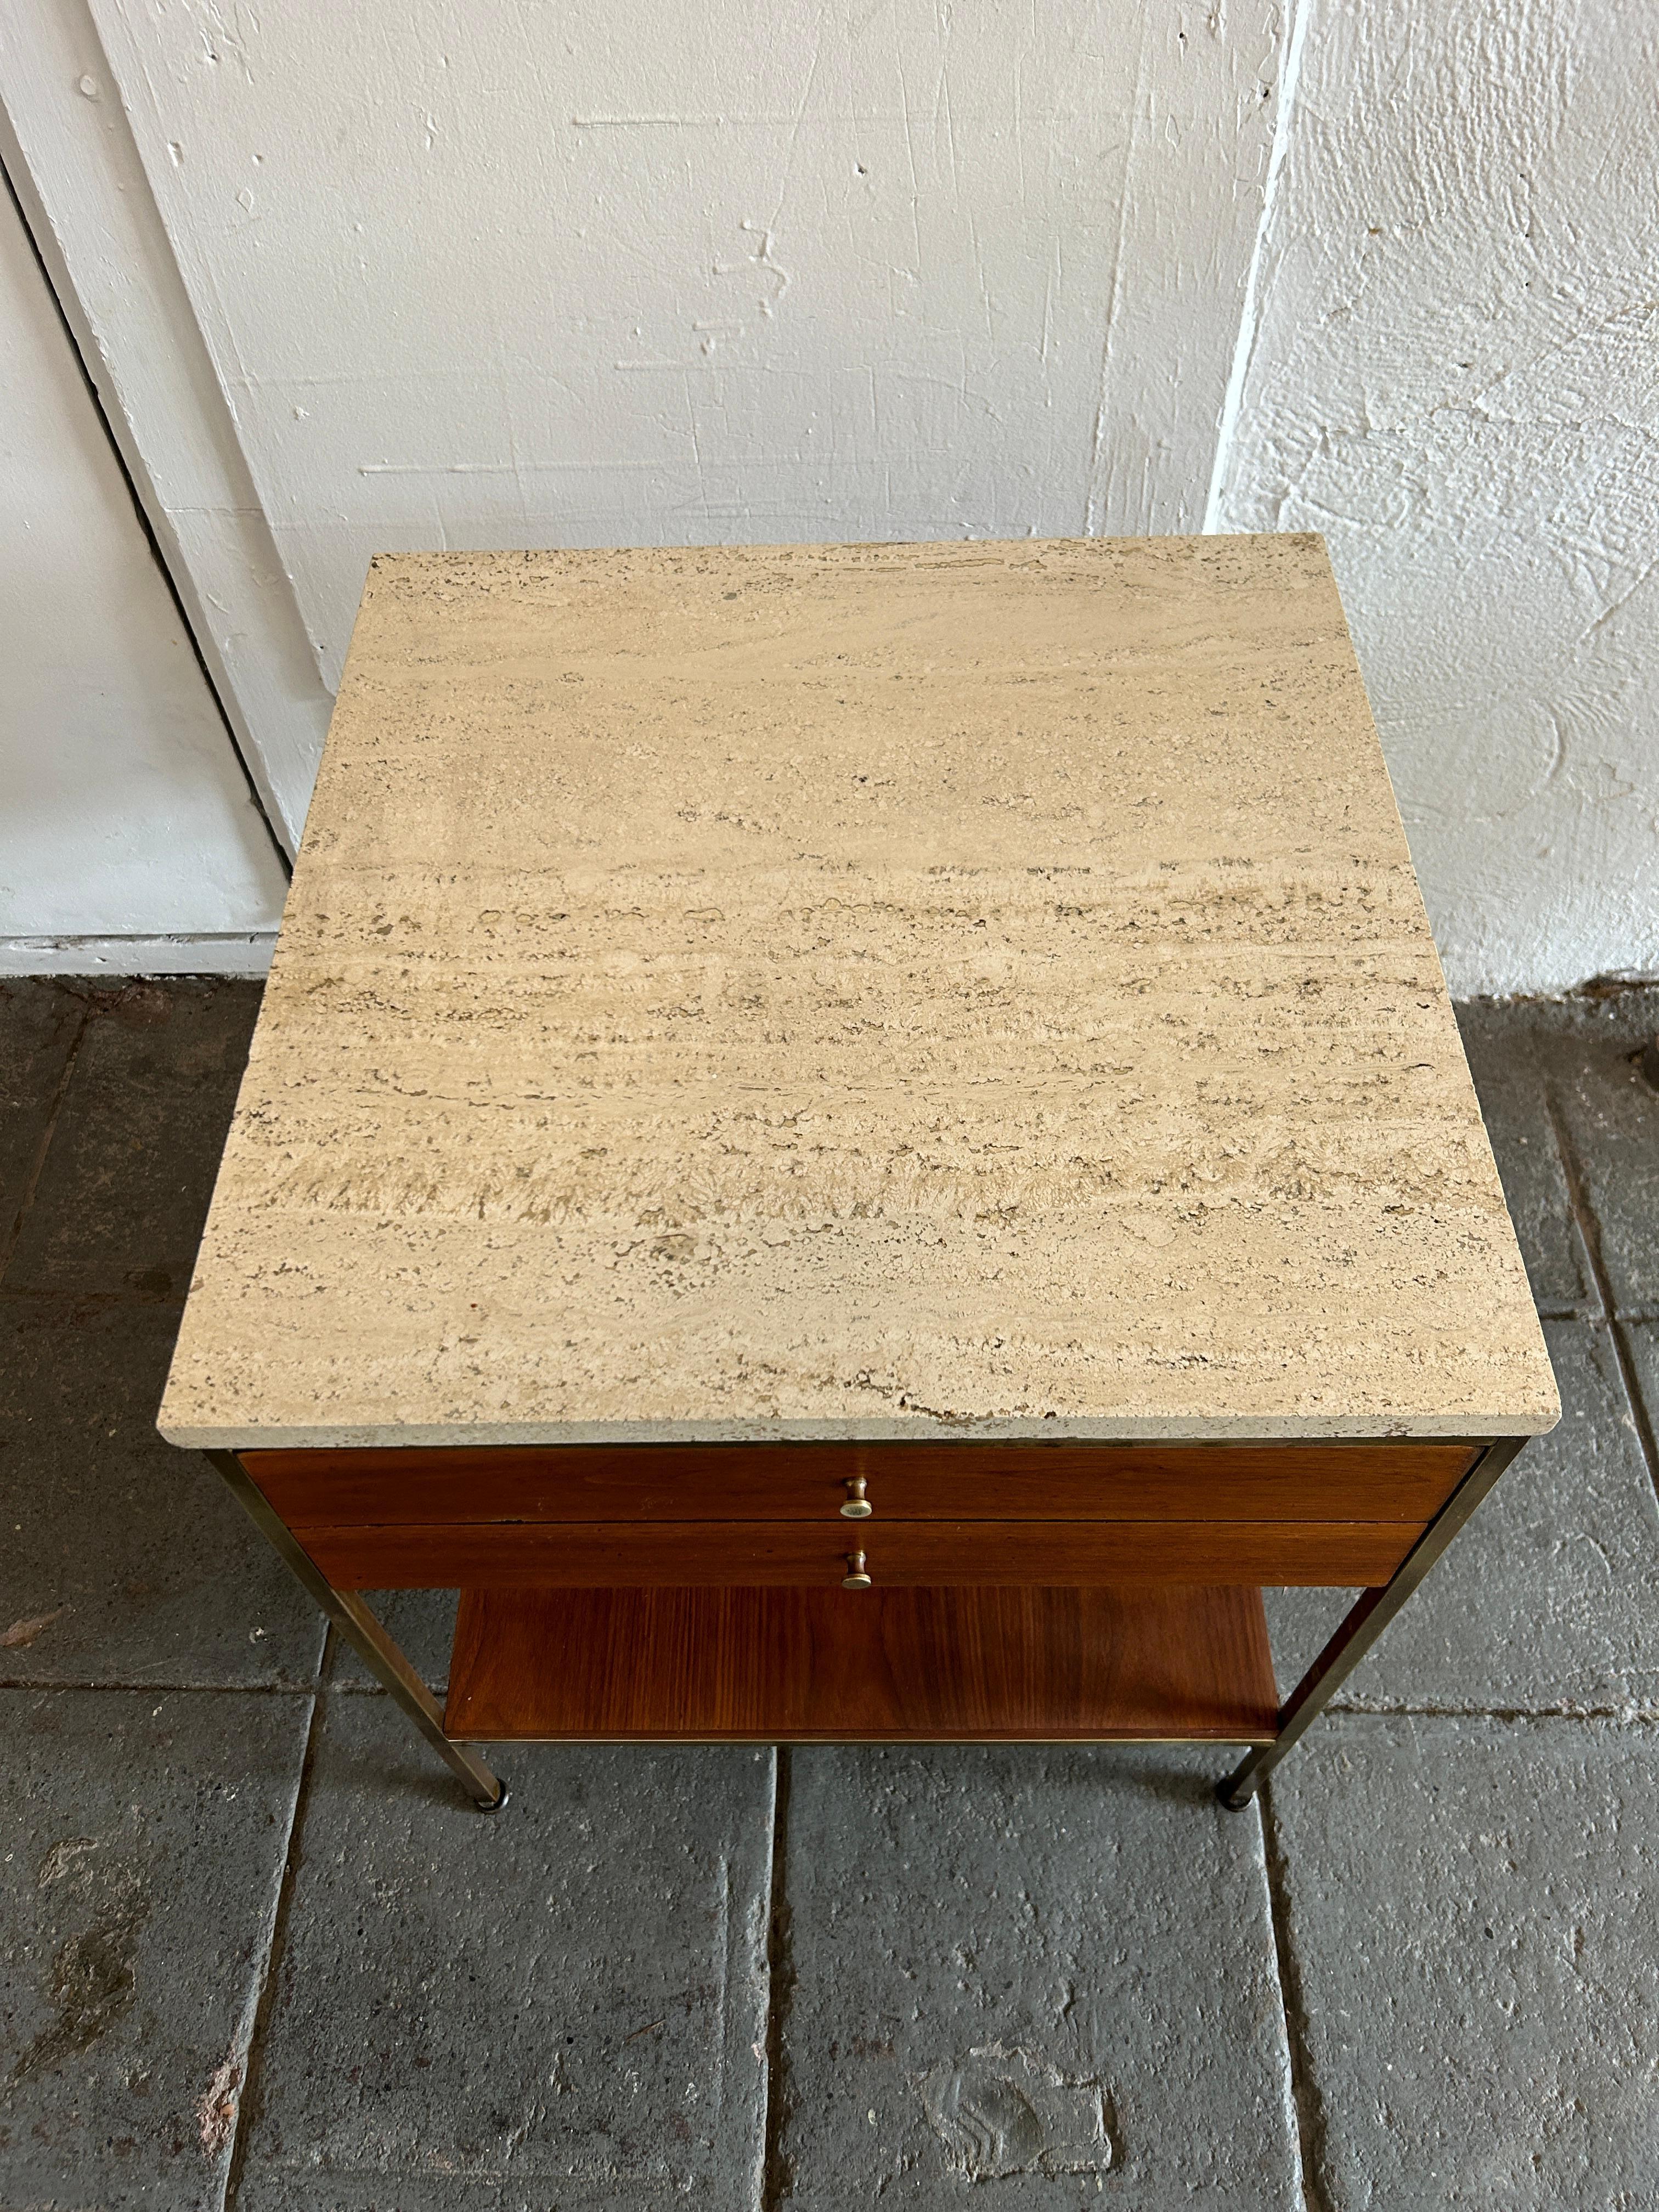 Beautiful Paul McCobb rare Single Nightstand / bedside table. Paul Mccobb collection by Calvin. Walnut case topped with Travertine Stone top on a brass base featuring two drawers and a lower walnut shelf. In vintage condition Brass shows patina and